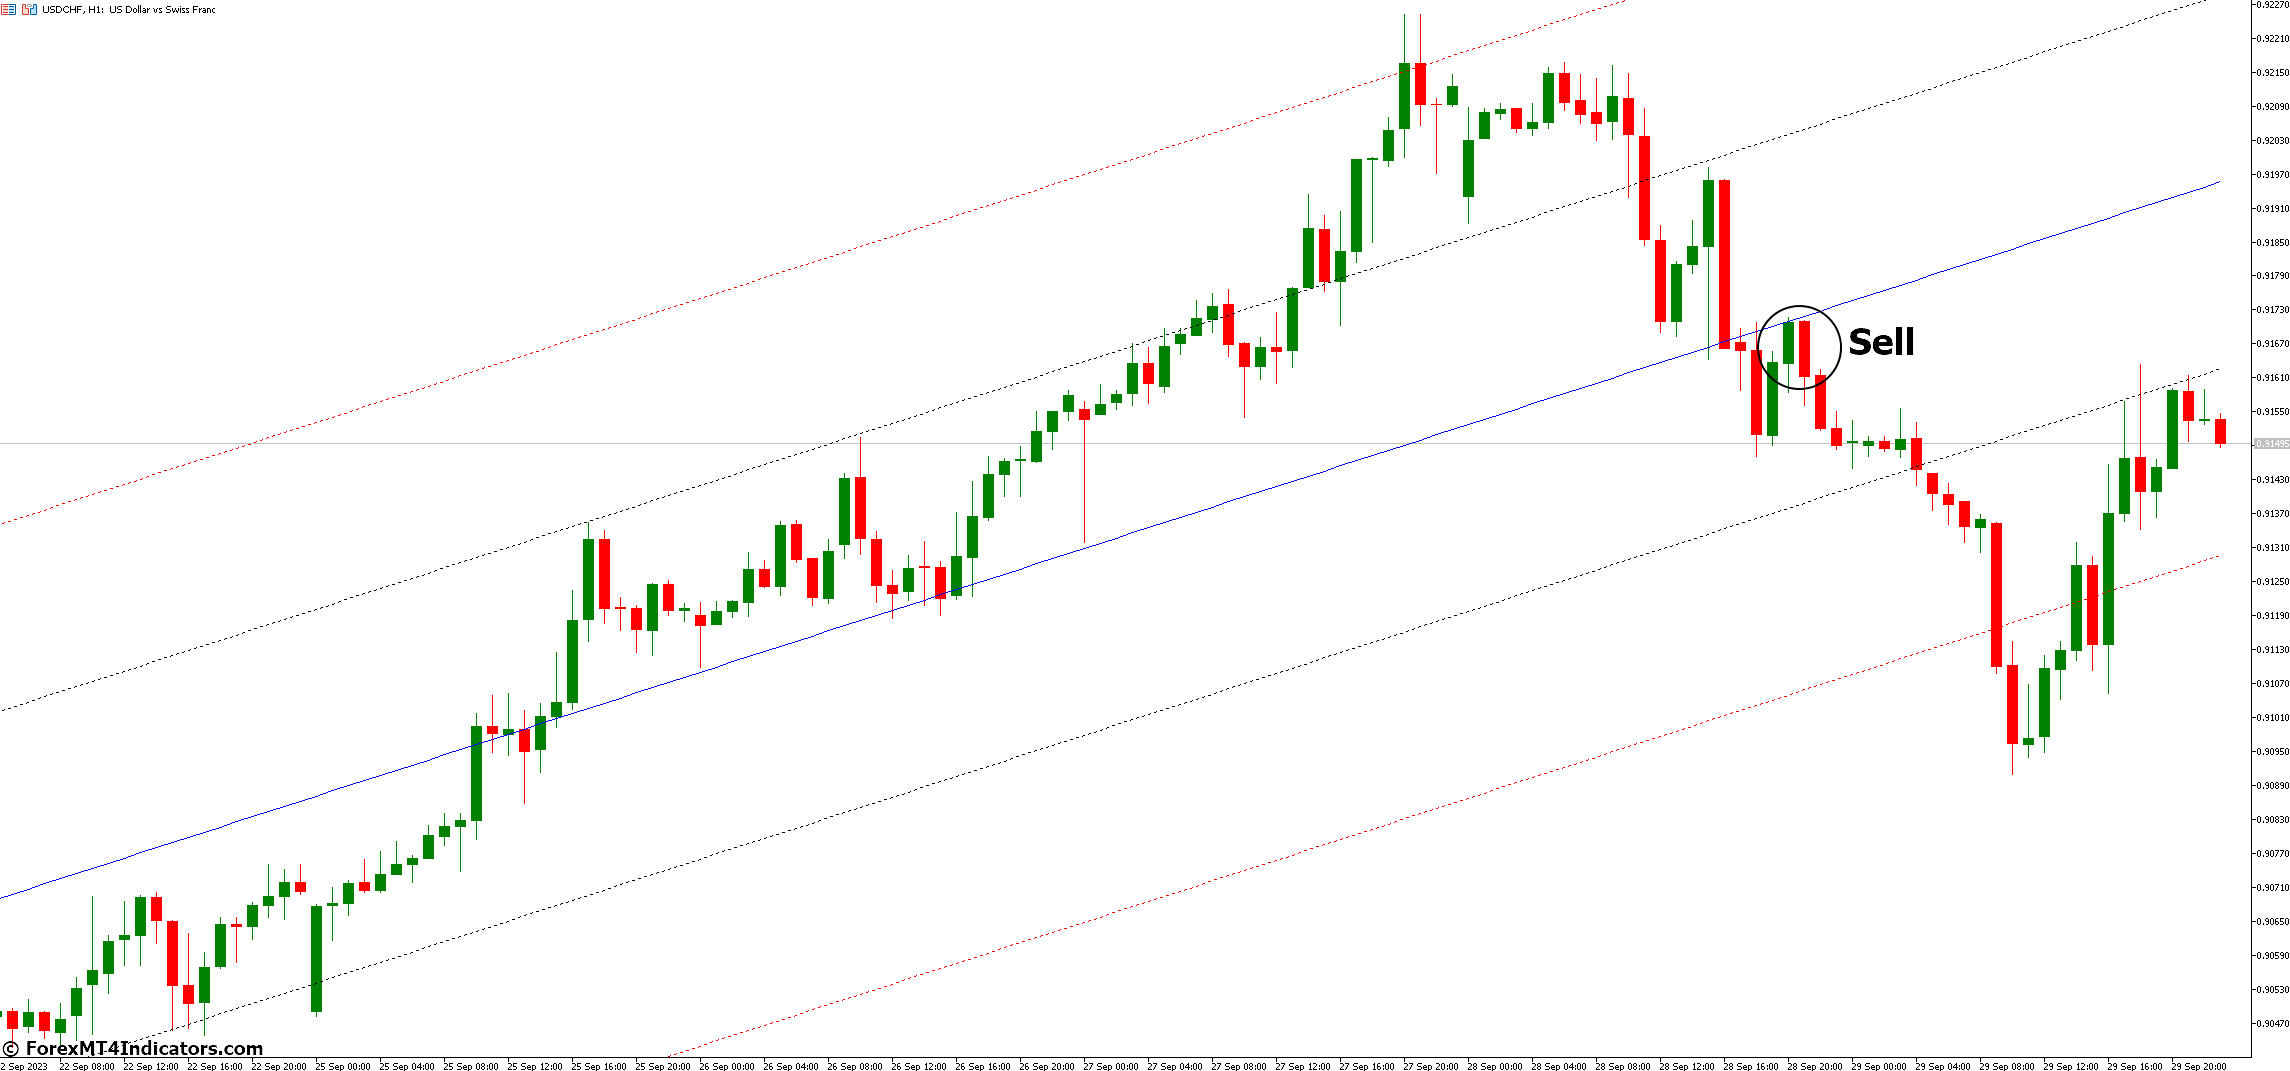 How to Trade with Linear Regression Channel MT5 Indicator - Sell Entry